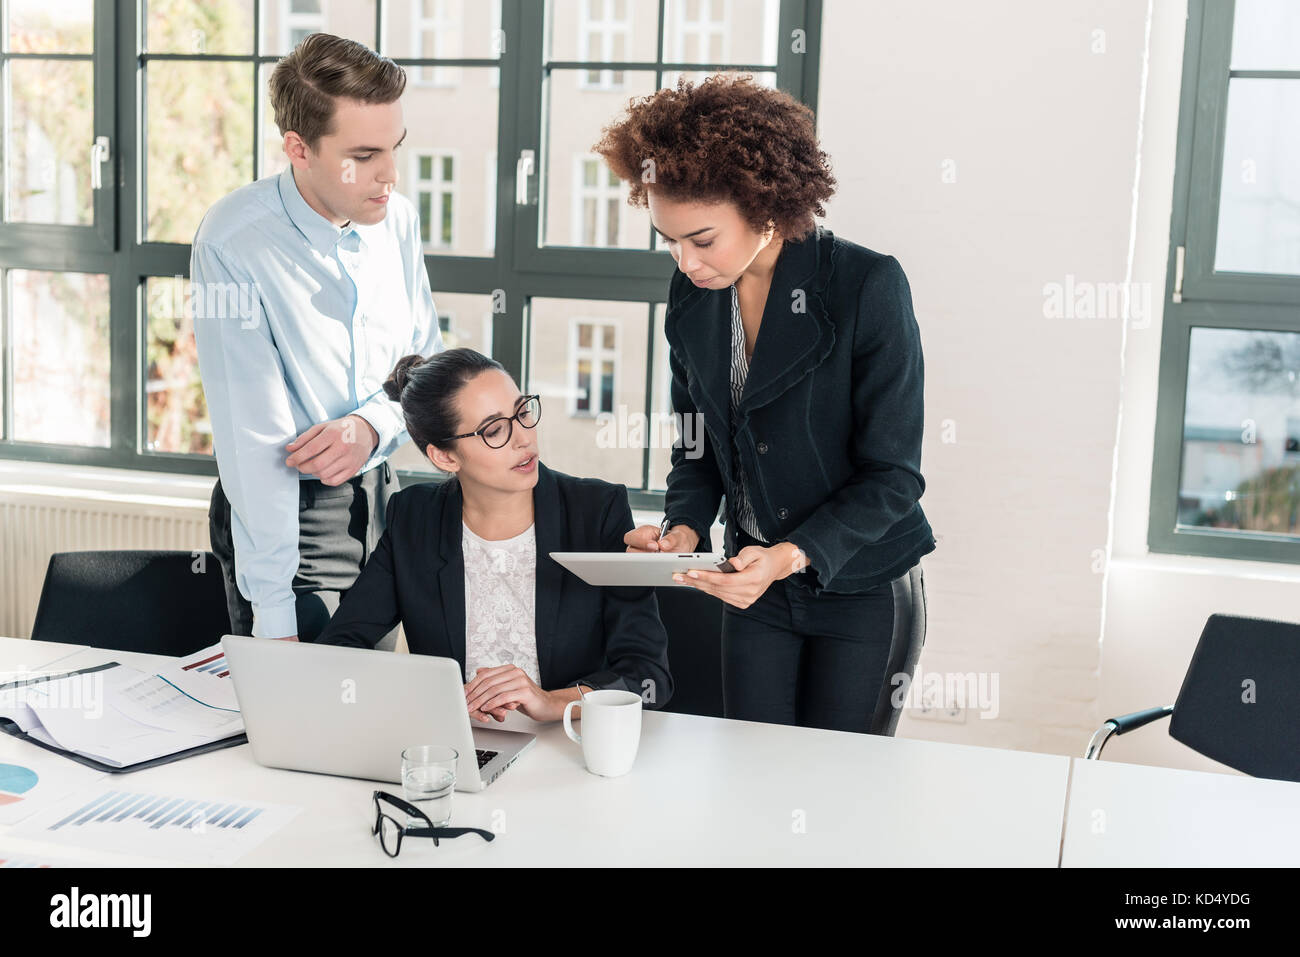 Three members of a young professional team working together Stock Photo